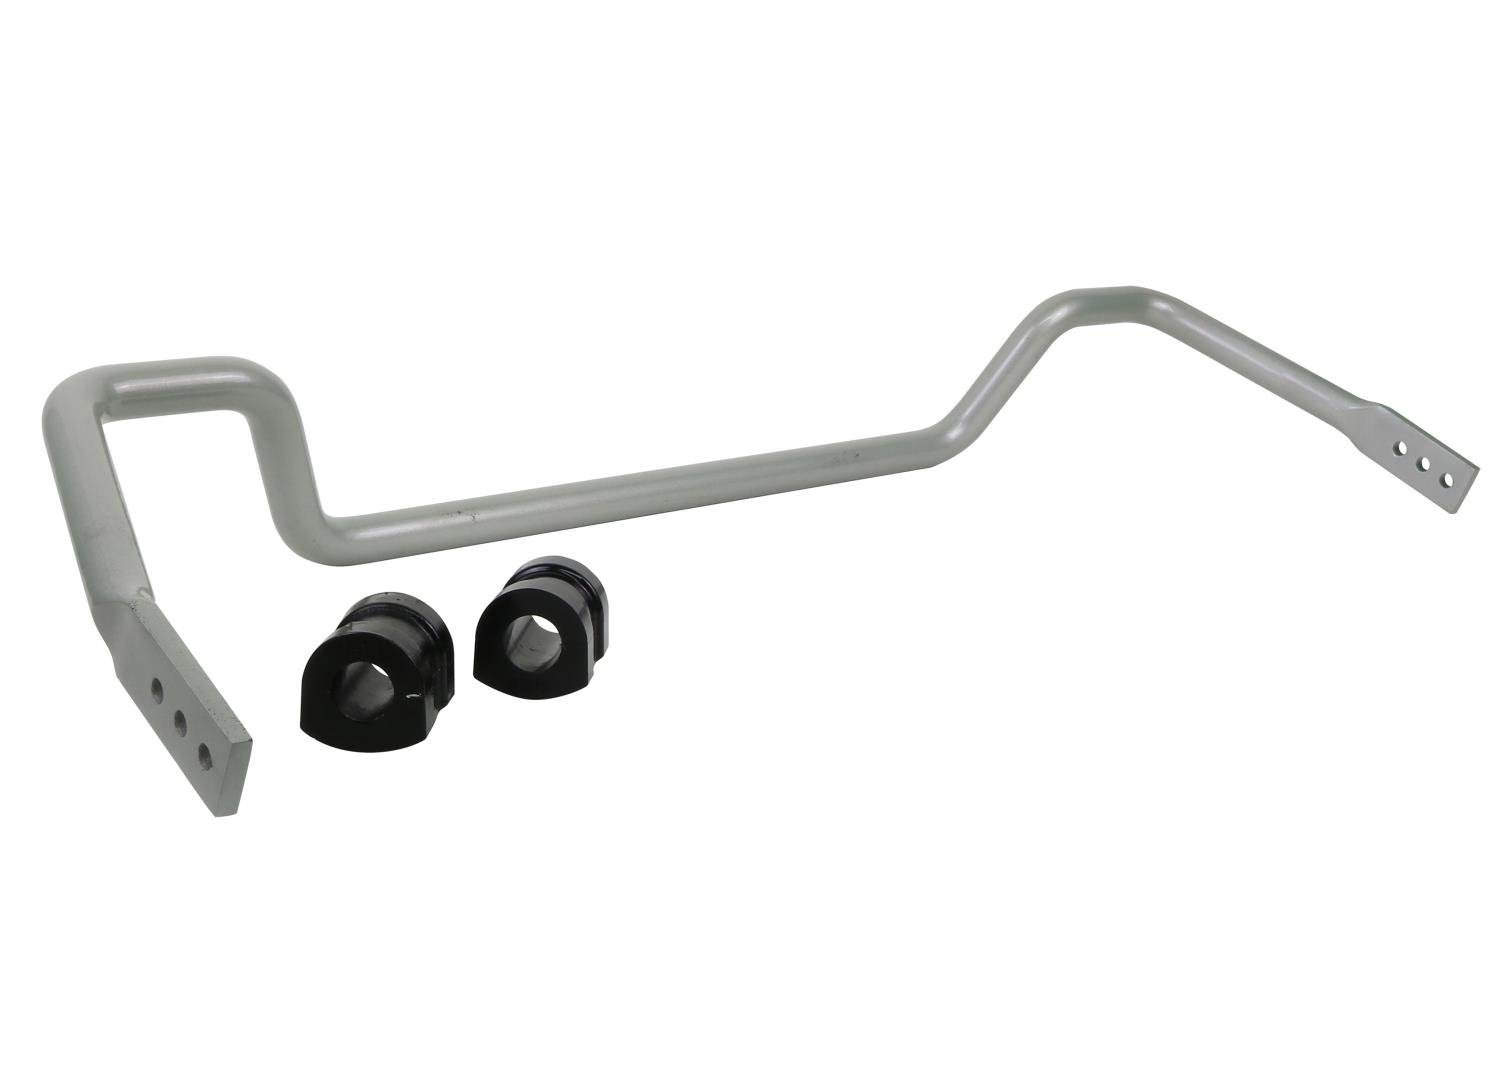 BBF38Z Front Heavy Duty Adjustable 27 mm Sway Bar for 1990-1999 BMW 318, 320, 323, 325, 328, M3